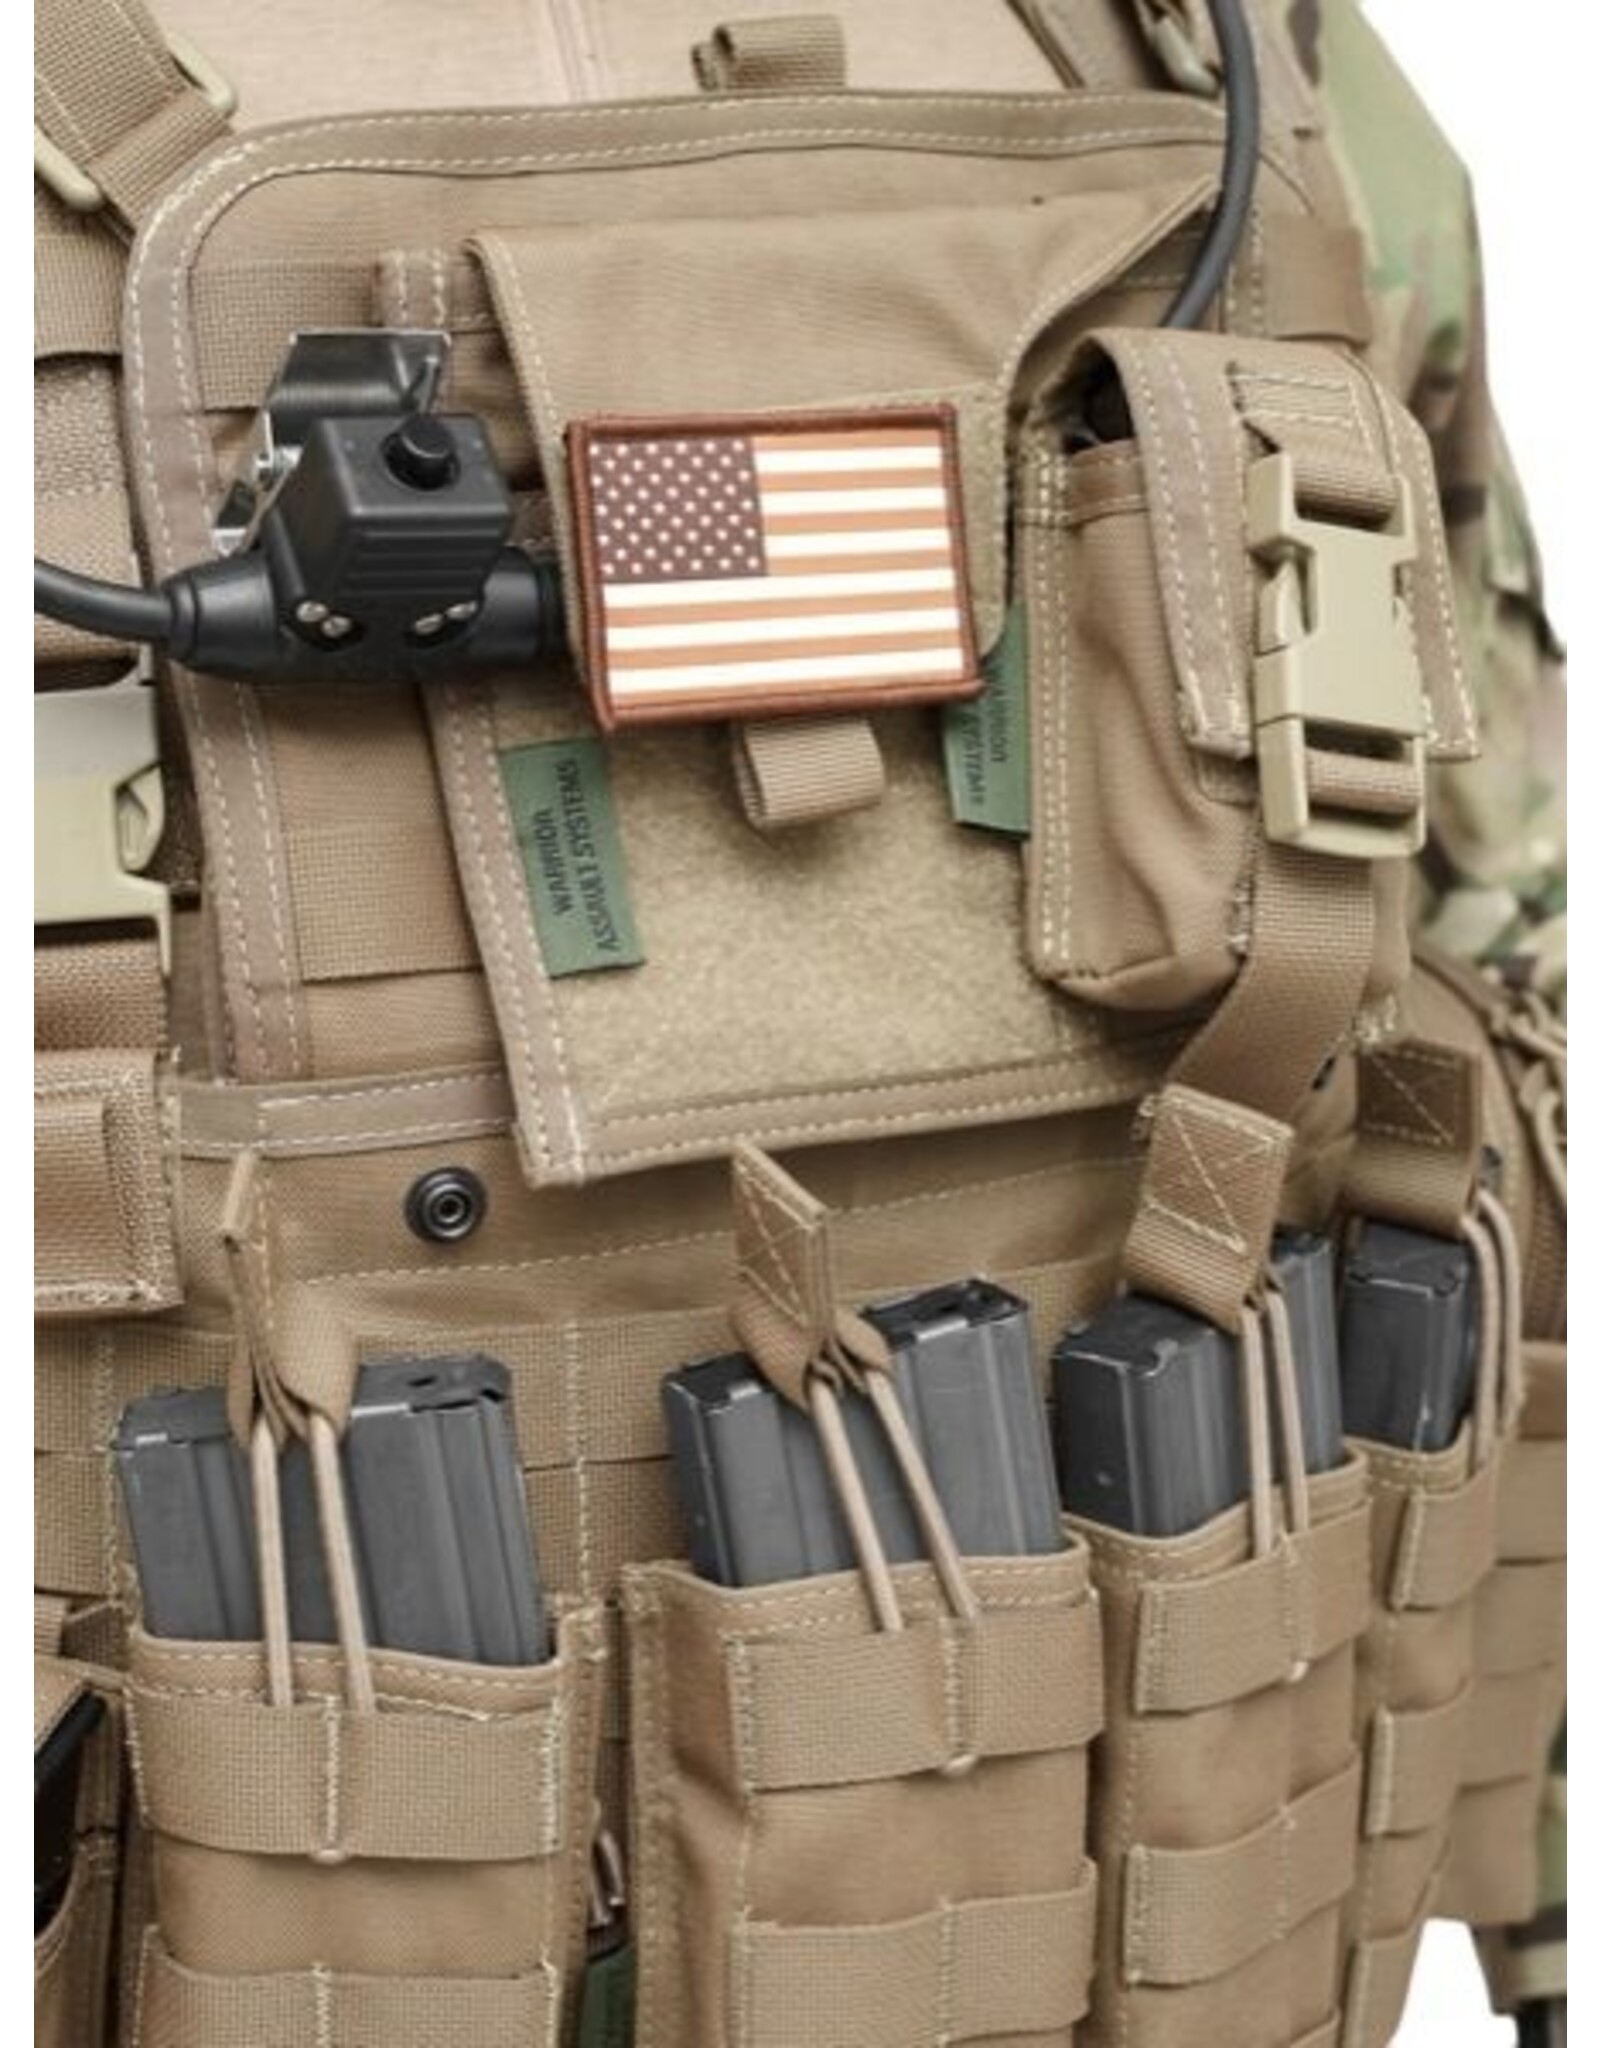 Warrior Large Admin Panel w Pistol Pouch - Coyote Tan